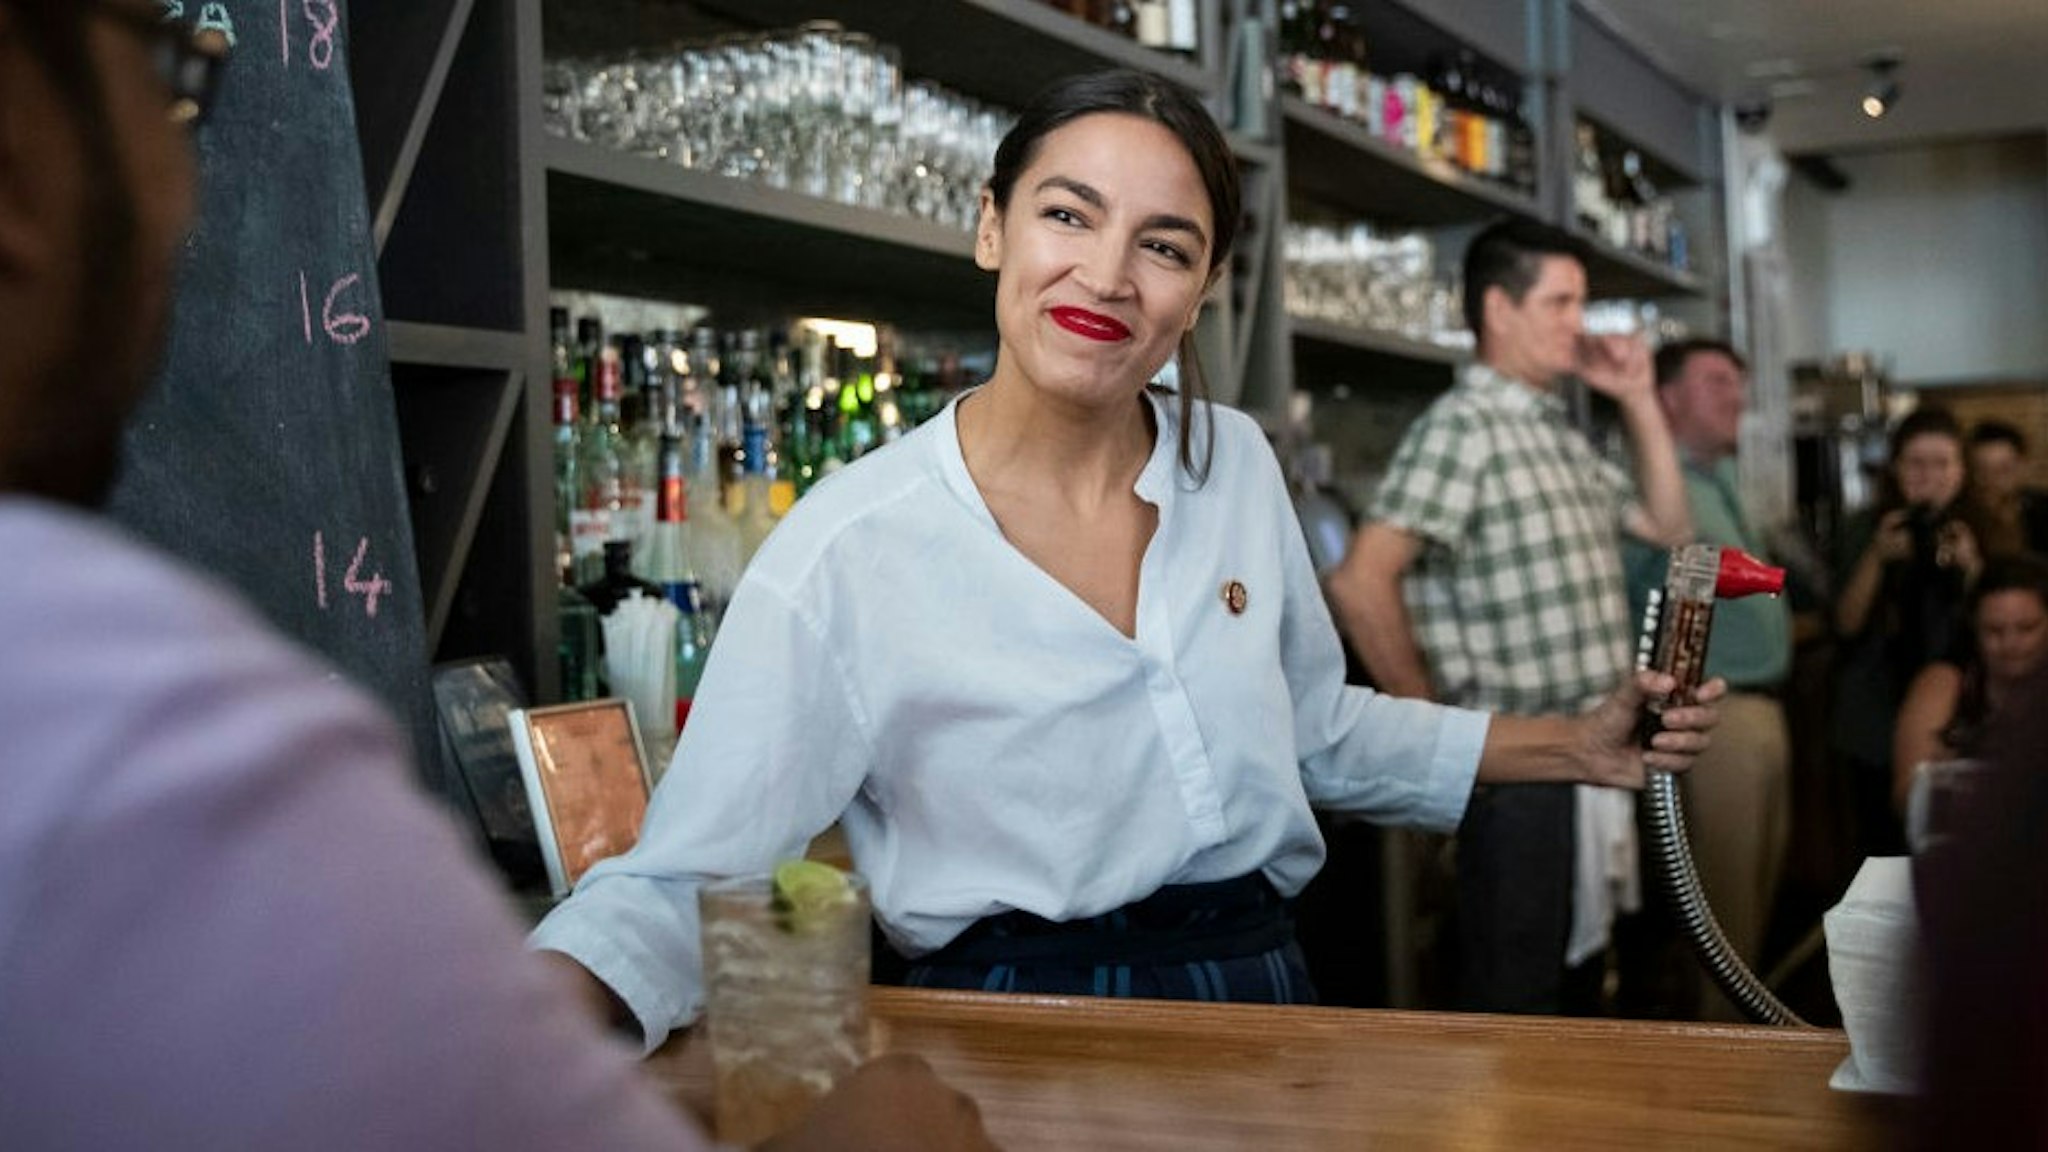 NEW YORK, NY - MAY 31: U.S. Rep. Alexandria Ocasio-Cortez (D-NY) works behind the bar at the Queensboro Restaurant, May 31, 2019 in the Queens borough of New York City. Ocasio-Cortez participated in an event to raise awareness for the One Fair Wage campaign, which calls to raise the minimum wage for tipped workers to a full minimum wage at the federal level. (Photo by